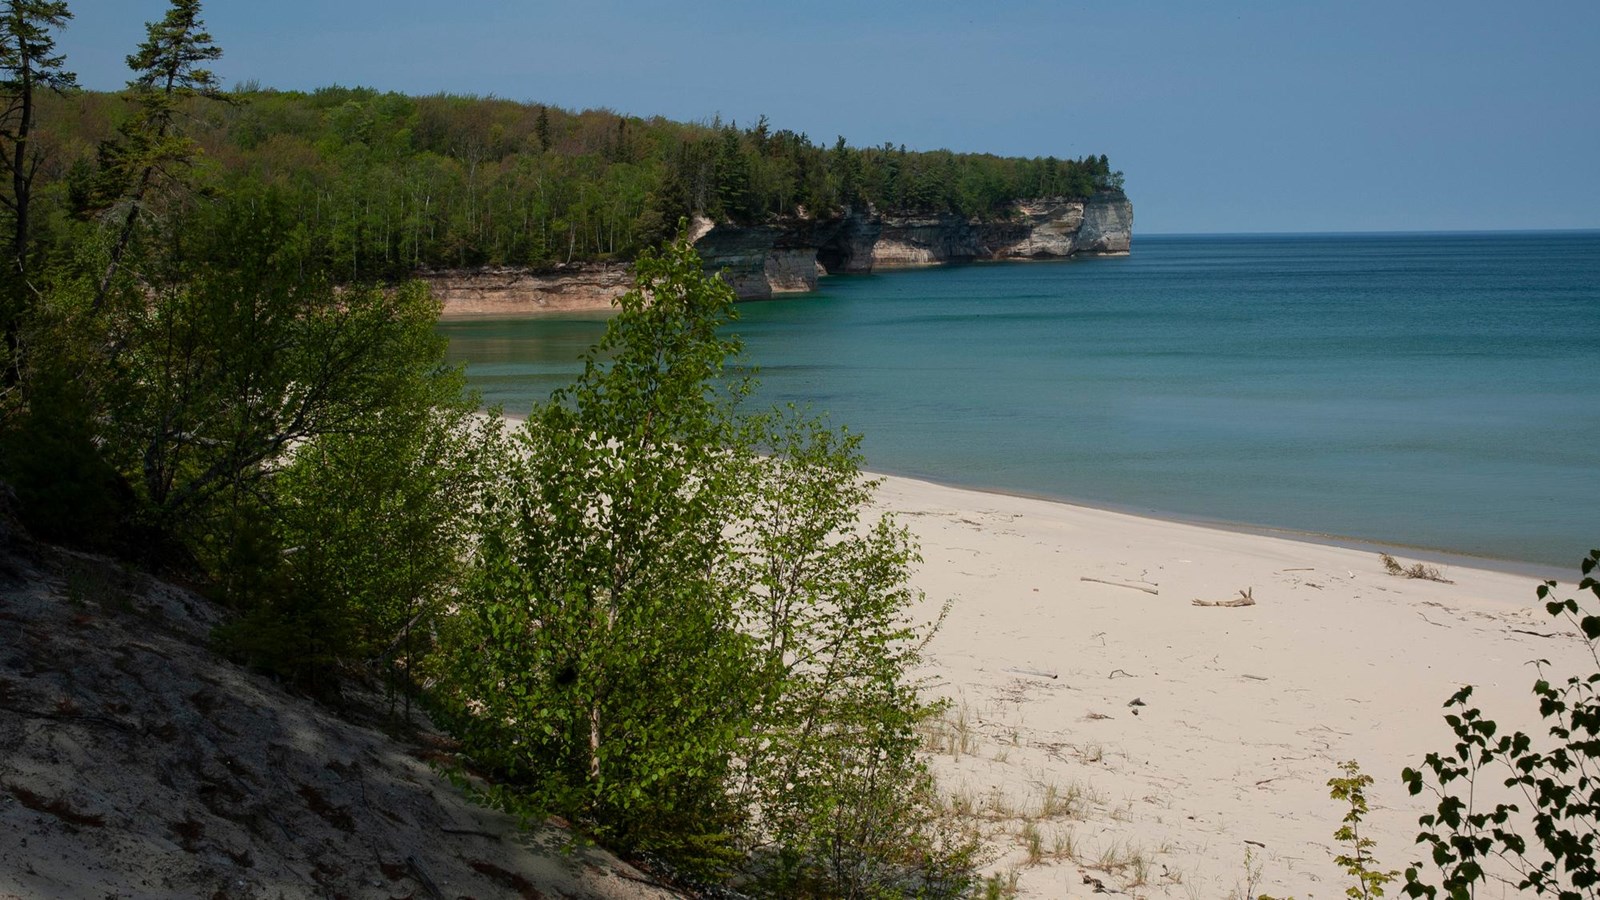 Small beach on Lake Superior. Rock cliffs rise out of the water in the distance. The water is calm.